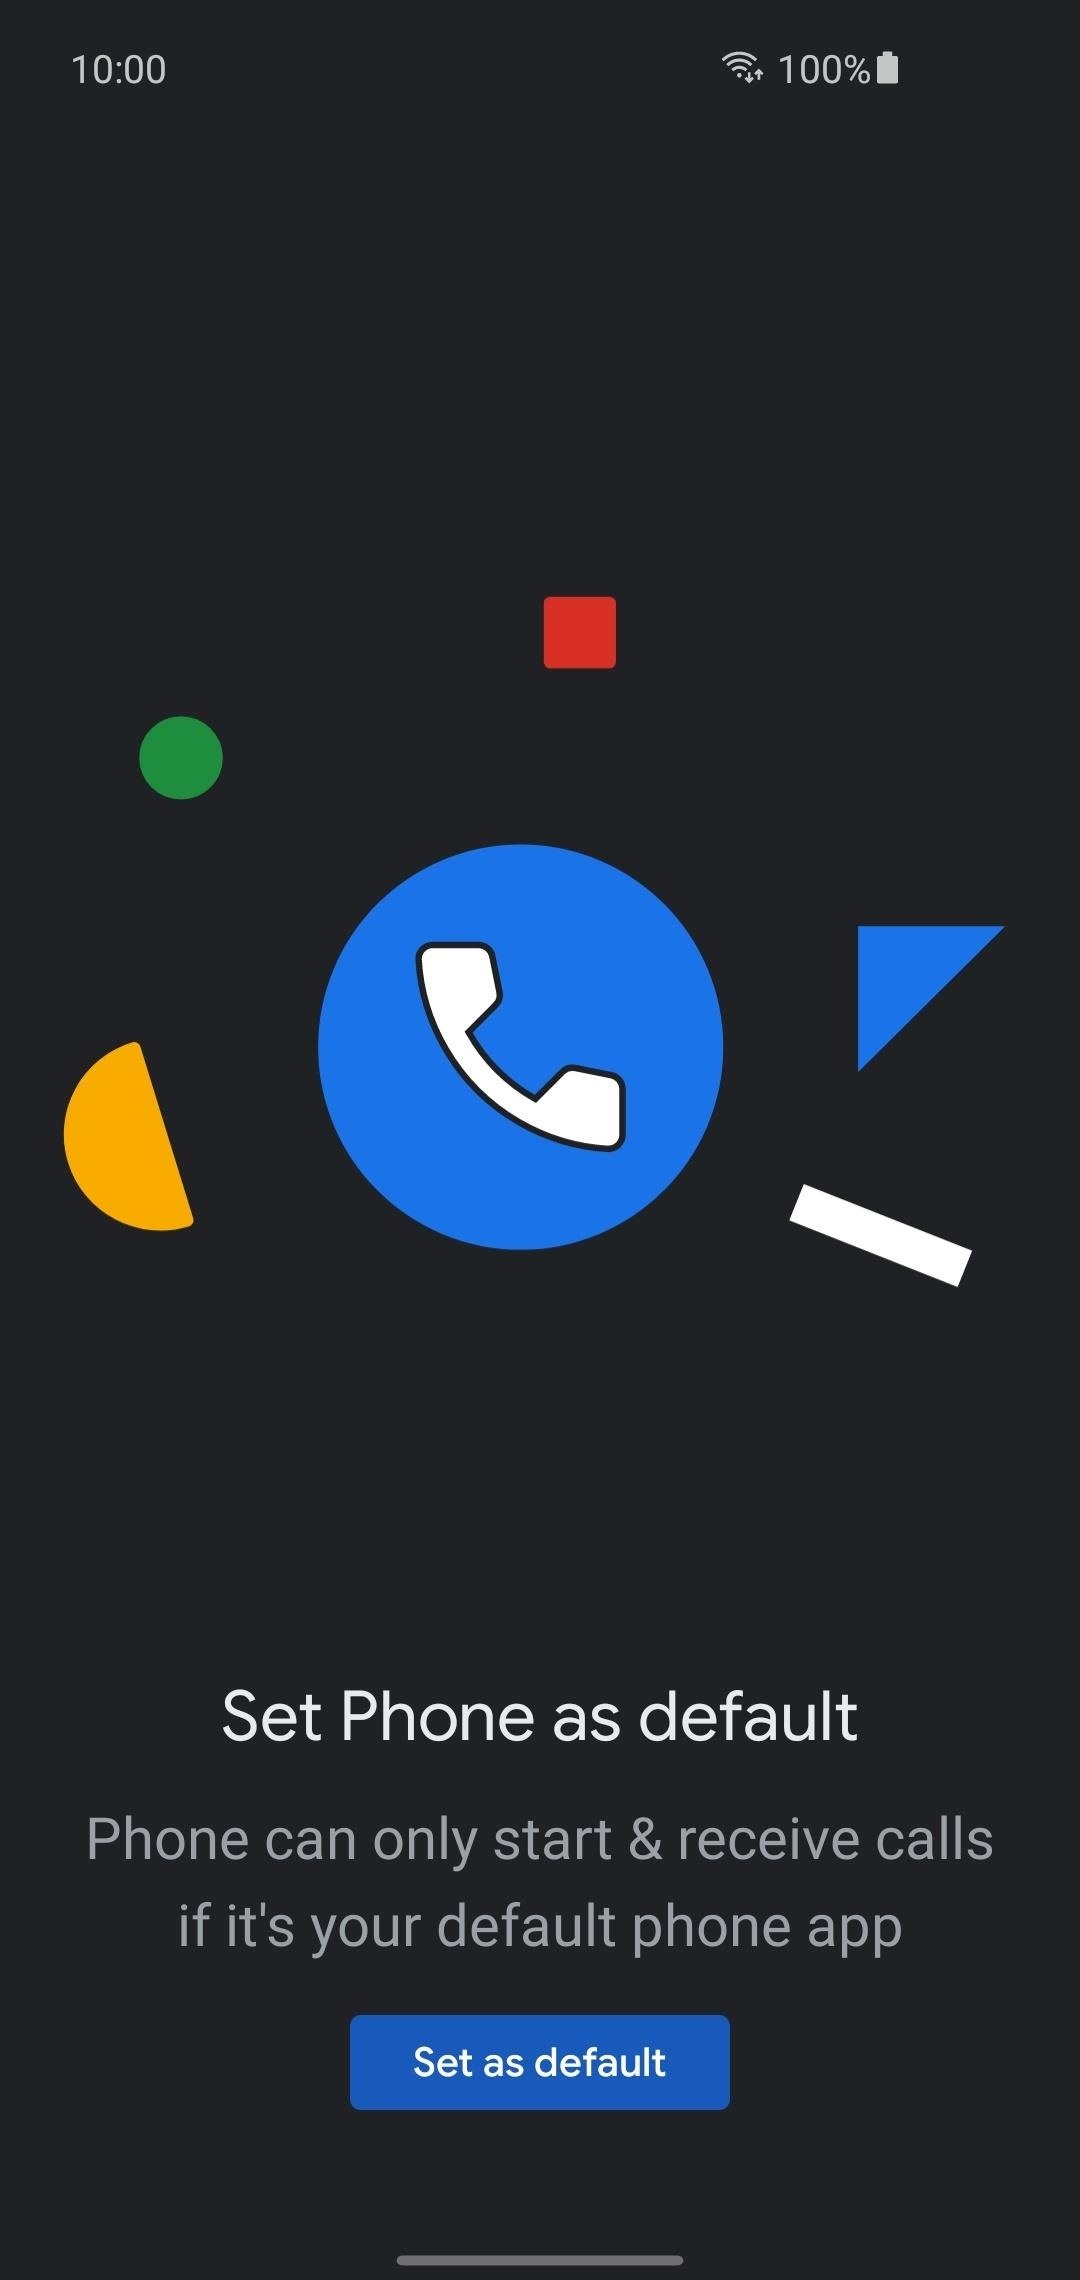 How to Get Google's Fantastic Caller ID & Spam Blocking on Any Phone